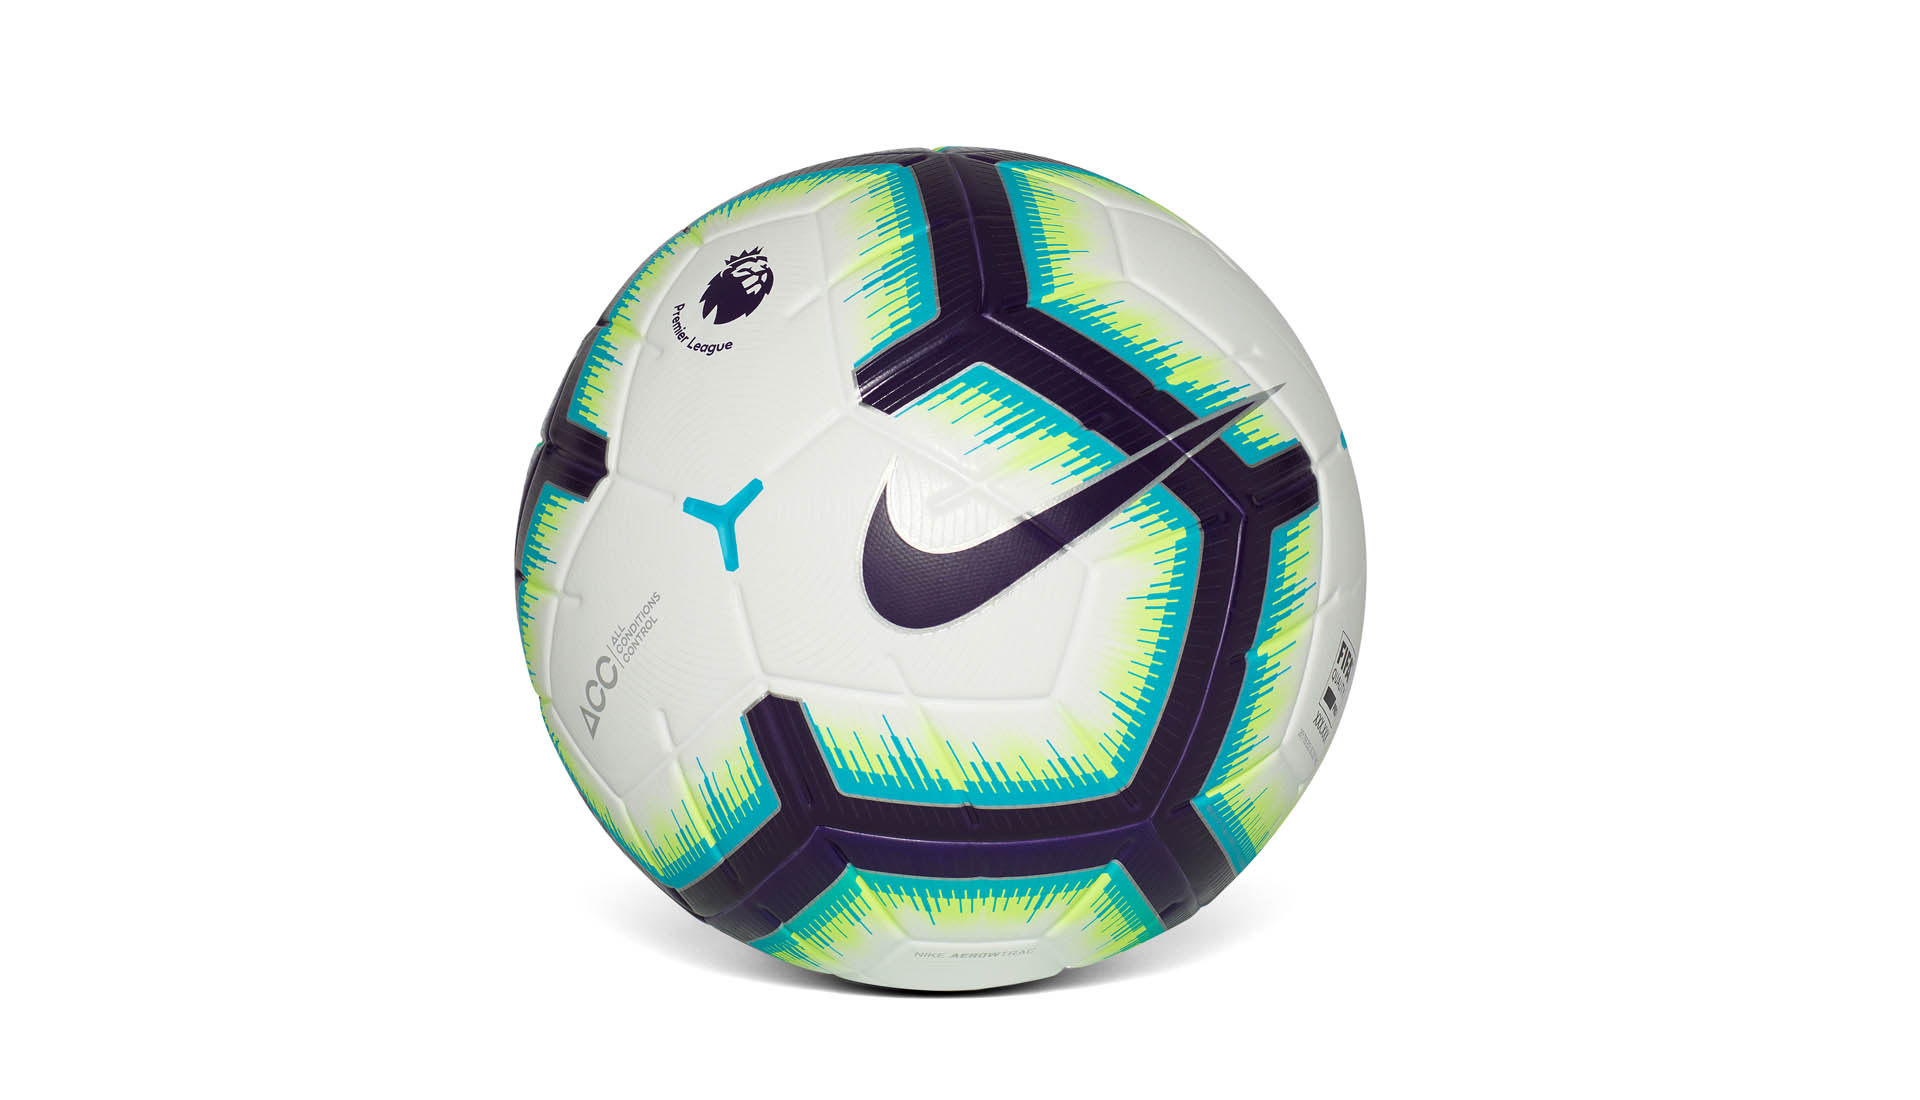 Ball of Fame: The 10 Most Valuable Official Match Balls of the 21st Century  - Urban Pitch